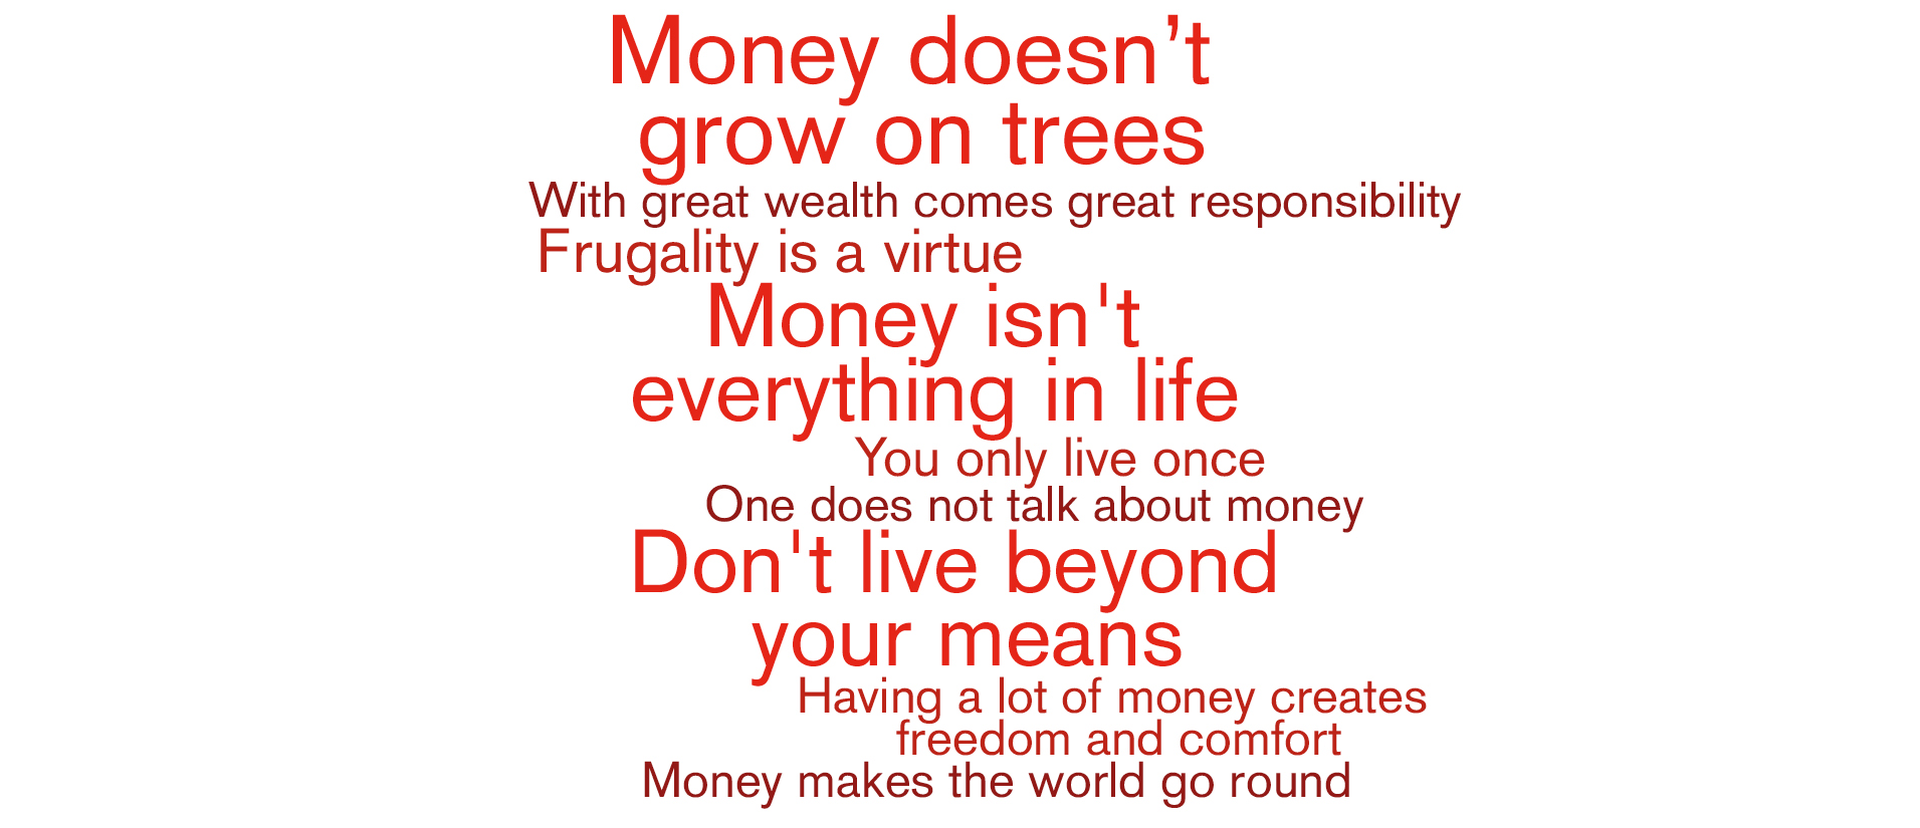 Parents agreed with these financial principles most often.